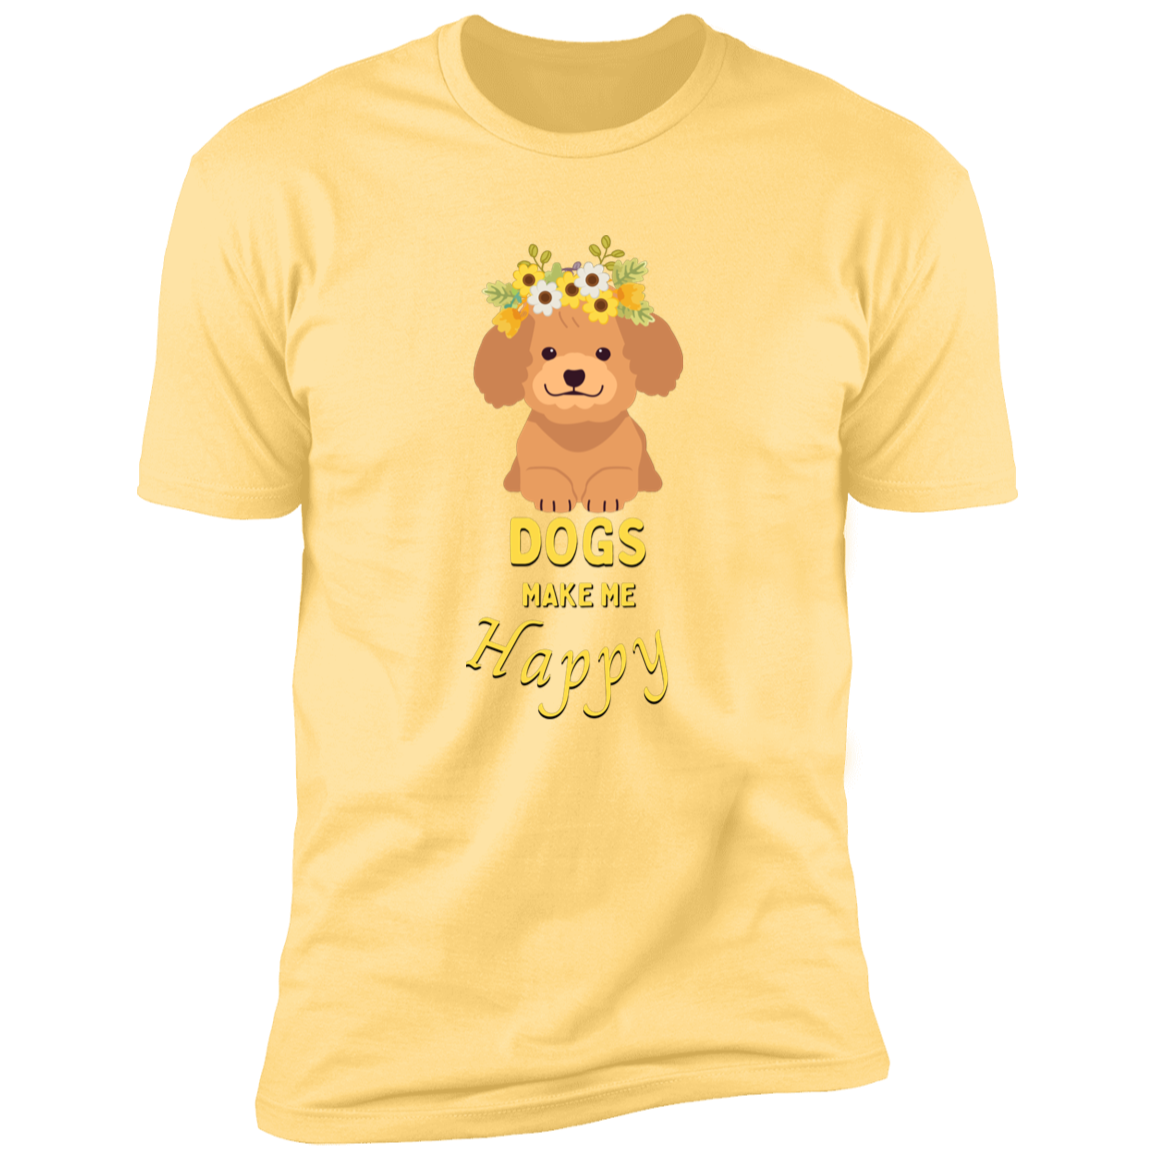 Dogs Make Me Happy t-shirt, funny dog shirt for humans, in banana cream